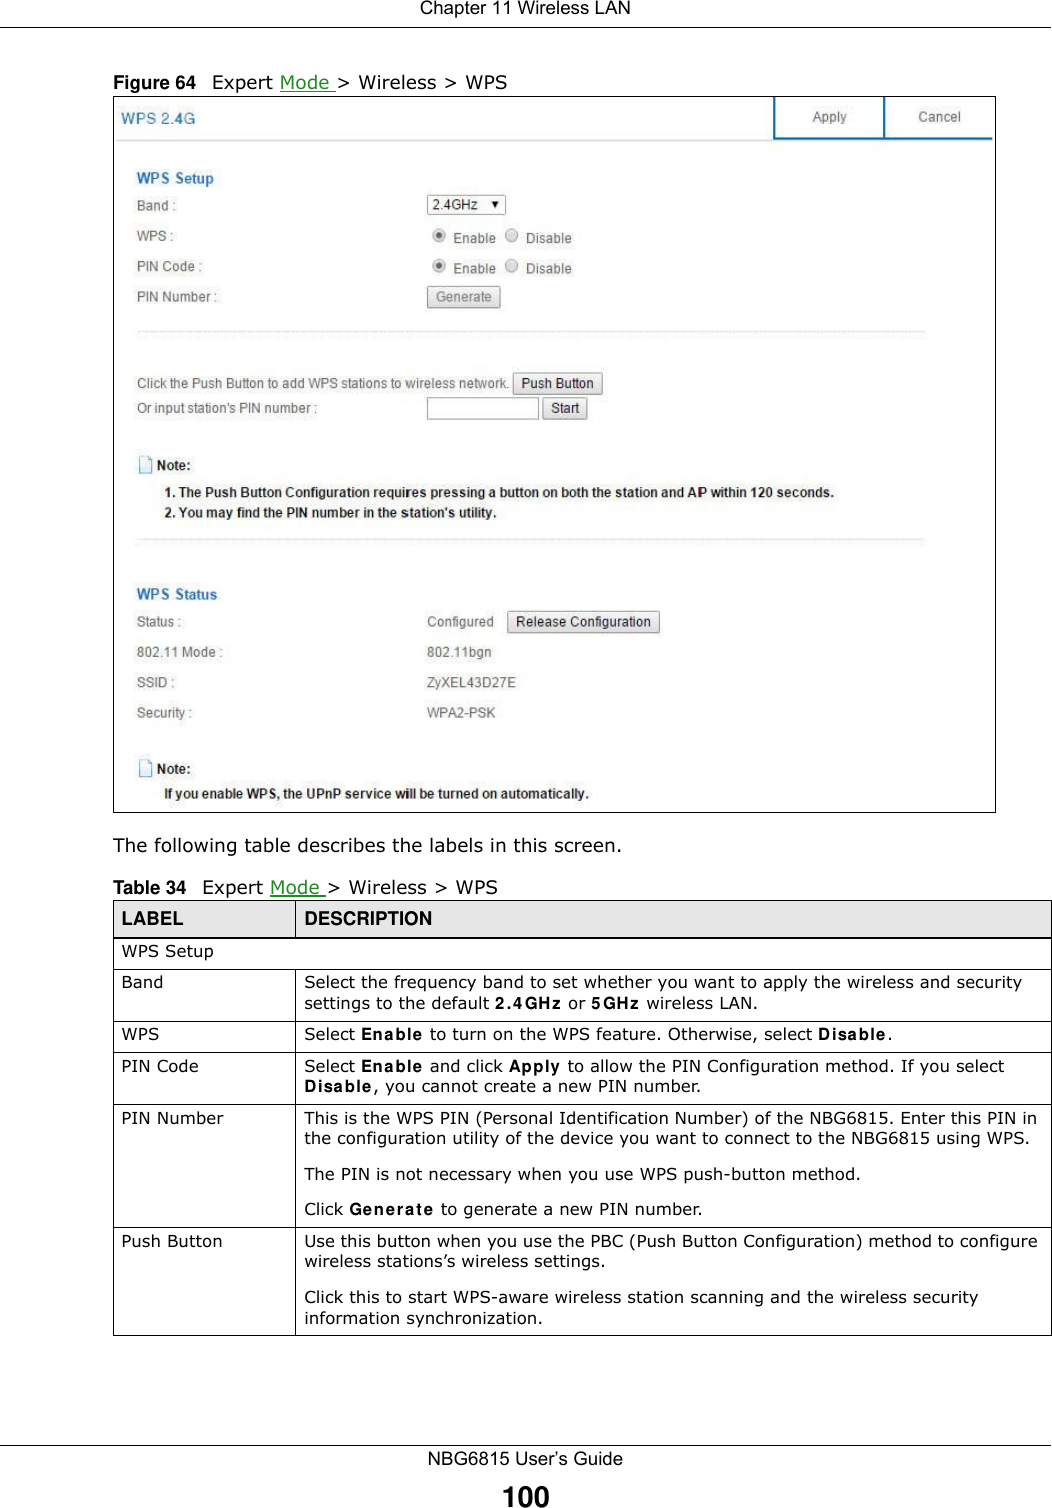 Chapter 11 Wireless LANNBG6815 User’s Guide100Figure 64   Expert Mode &gt; Wireless &gt; WPSThe following table describes the labels in this screen.Table 34   Expert Mode &gt; Wireless &gt; WPSLABEL DESCRIPTIONWPS SetupBand Select the frequency band to set whether you want to apply the wireless and security settings to the default 2.4GHz or 5GHz wireless LAN. WPS Select Enable to turn on the WPS feature. Otherwise, select Disable.PIN Code Select Enable and click Apply to allow the PIN Configuration method. If you select Disable, you cannot create a new PIN number.PIN Number This is the WPS PIN (Personal Identification Number) of the NBG6815. Enter this PIN in the configuration utility of the device you want to connect to the NBG6815 using WPS.The PIN is not necessary when you use WPS push-button method.Click Generate to generate a new PIN number.Push Button Use this button when you use the PBC (Push Button Configuration) method to configure wireless stations’s wireless settings. Click this to start WPS-aware wireless station scanning and the wireless security information synchronization. 